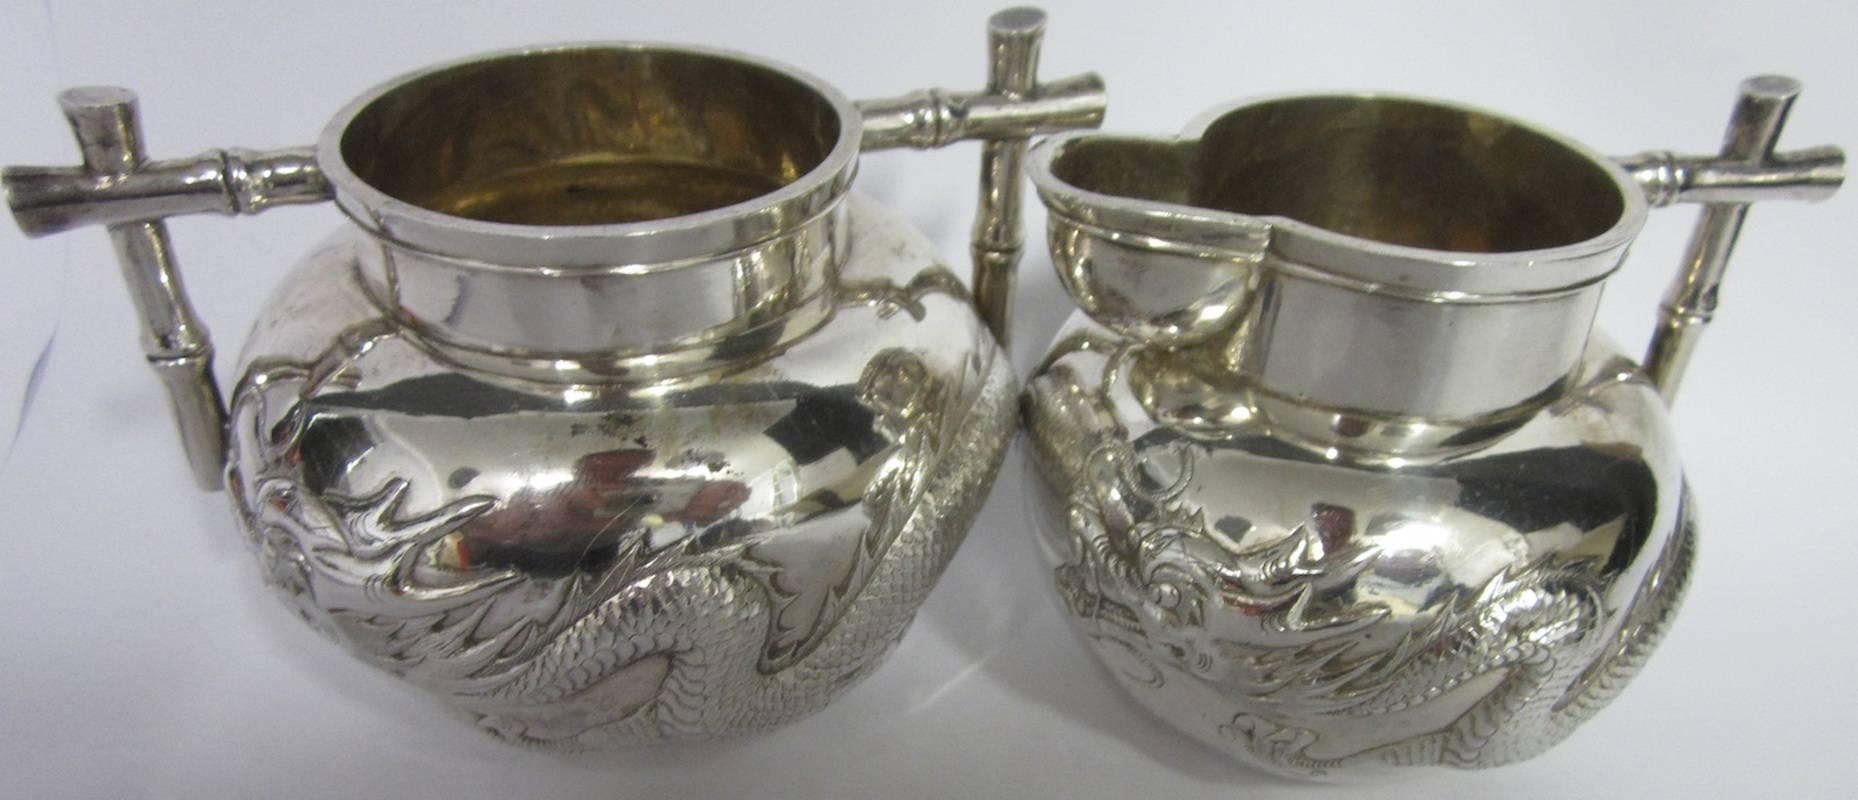 Hand-Crafted Chinese Export Silver by Wang Hing